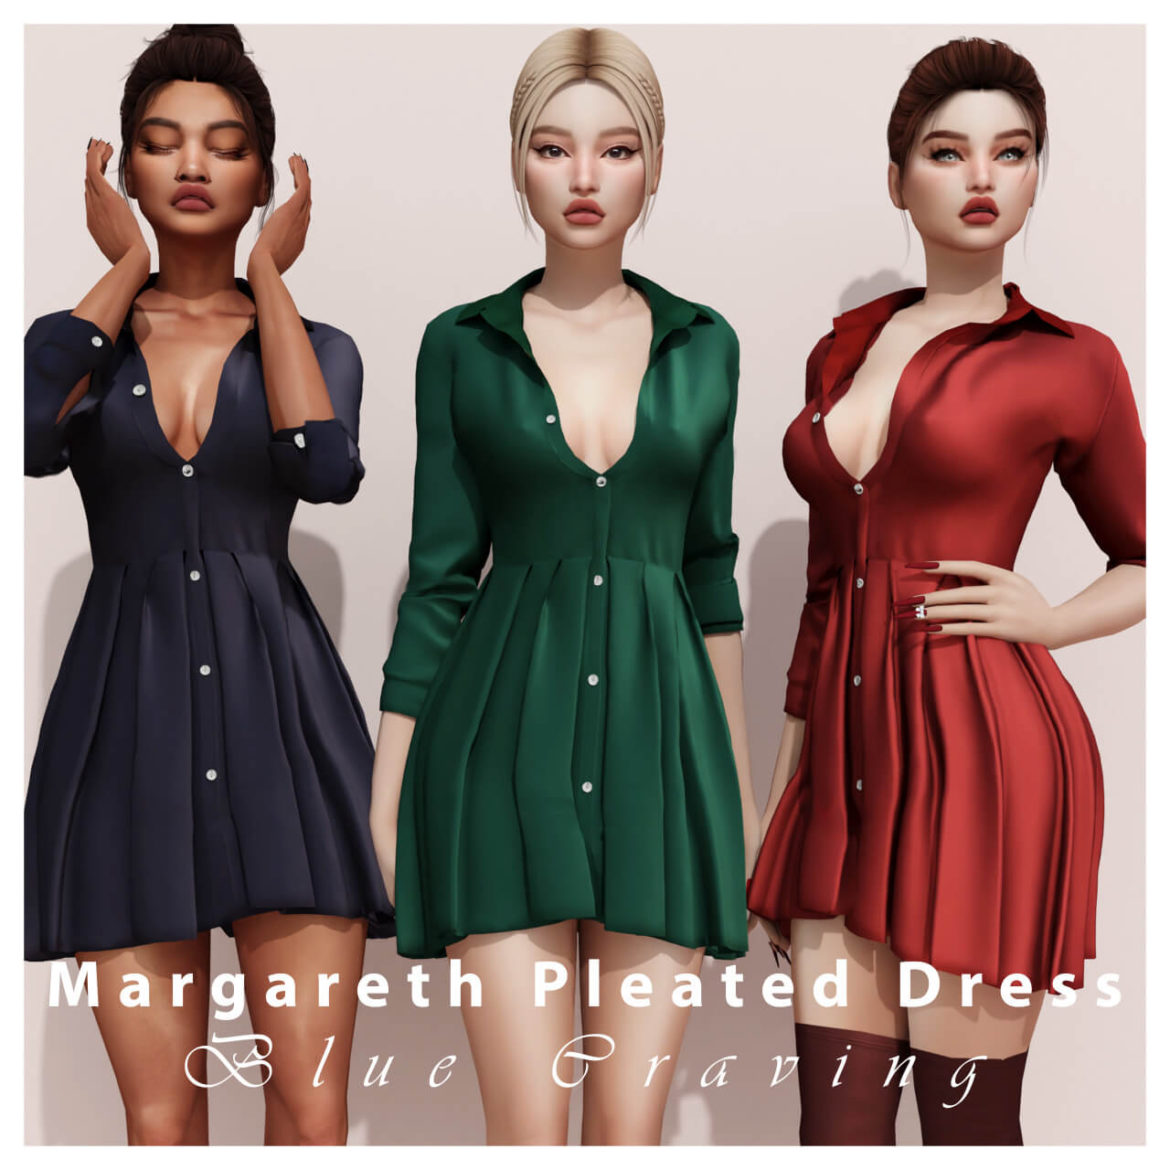 The Sims 4 MARGARETH PLEATED DRESS at Blue Craving - MiCat Game